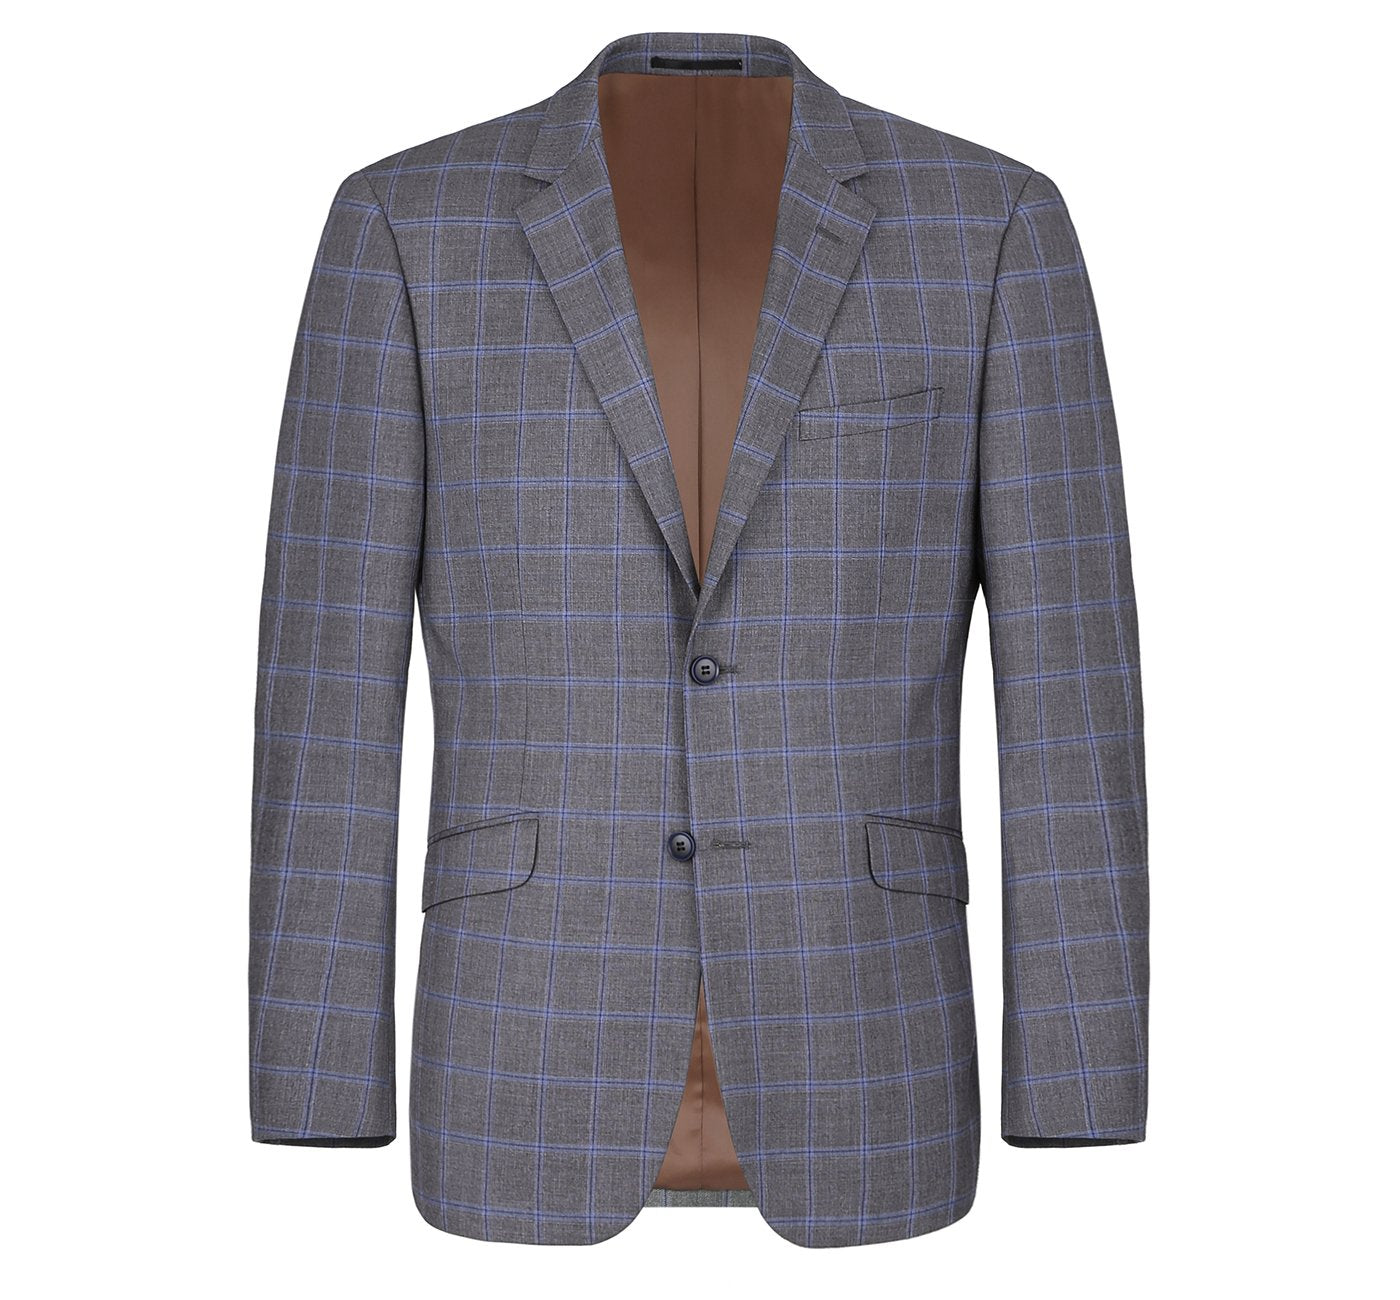 Men’s Slim Fit 2-Piece Single Breasted Check Dress Suit 3